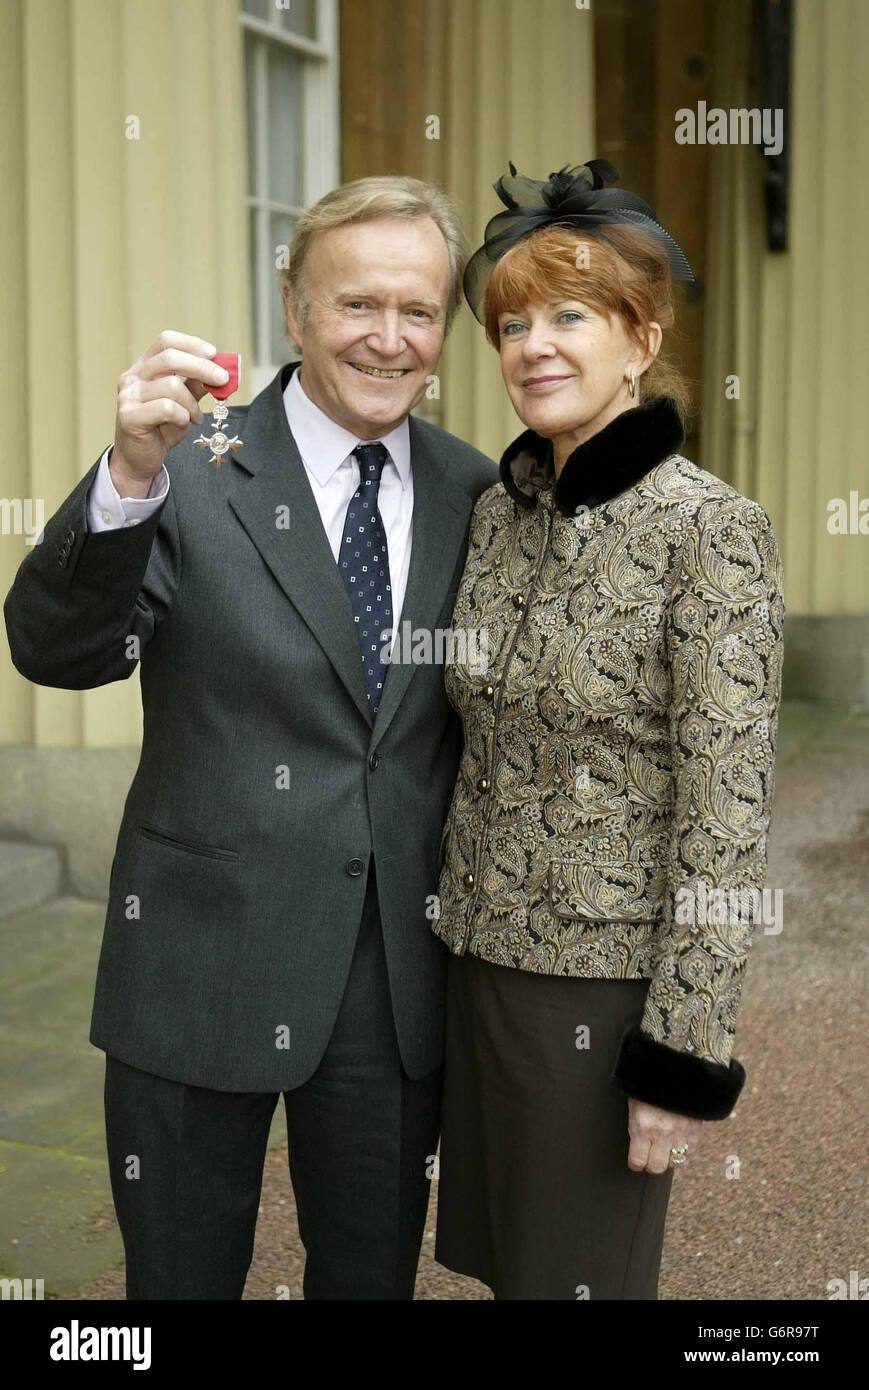 FOREIGN USE ONLY: Daily Mail cartoonist Stanley McMurtry, 67, alongside his wife Liz, as he holds the OBE which he received from Britain's Queen Elizabeth II at Buckingham Palace, London. He said the Queen told him she was 'aware' of his cartoons and that they had given her 'great pleasure'. Stock Photo